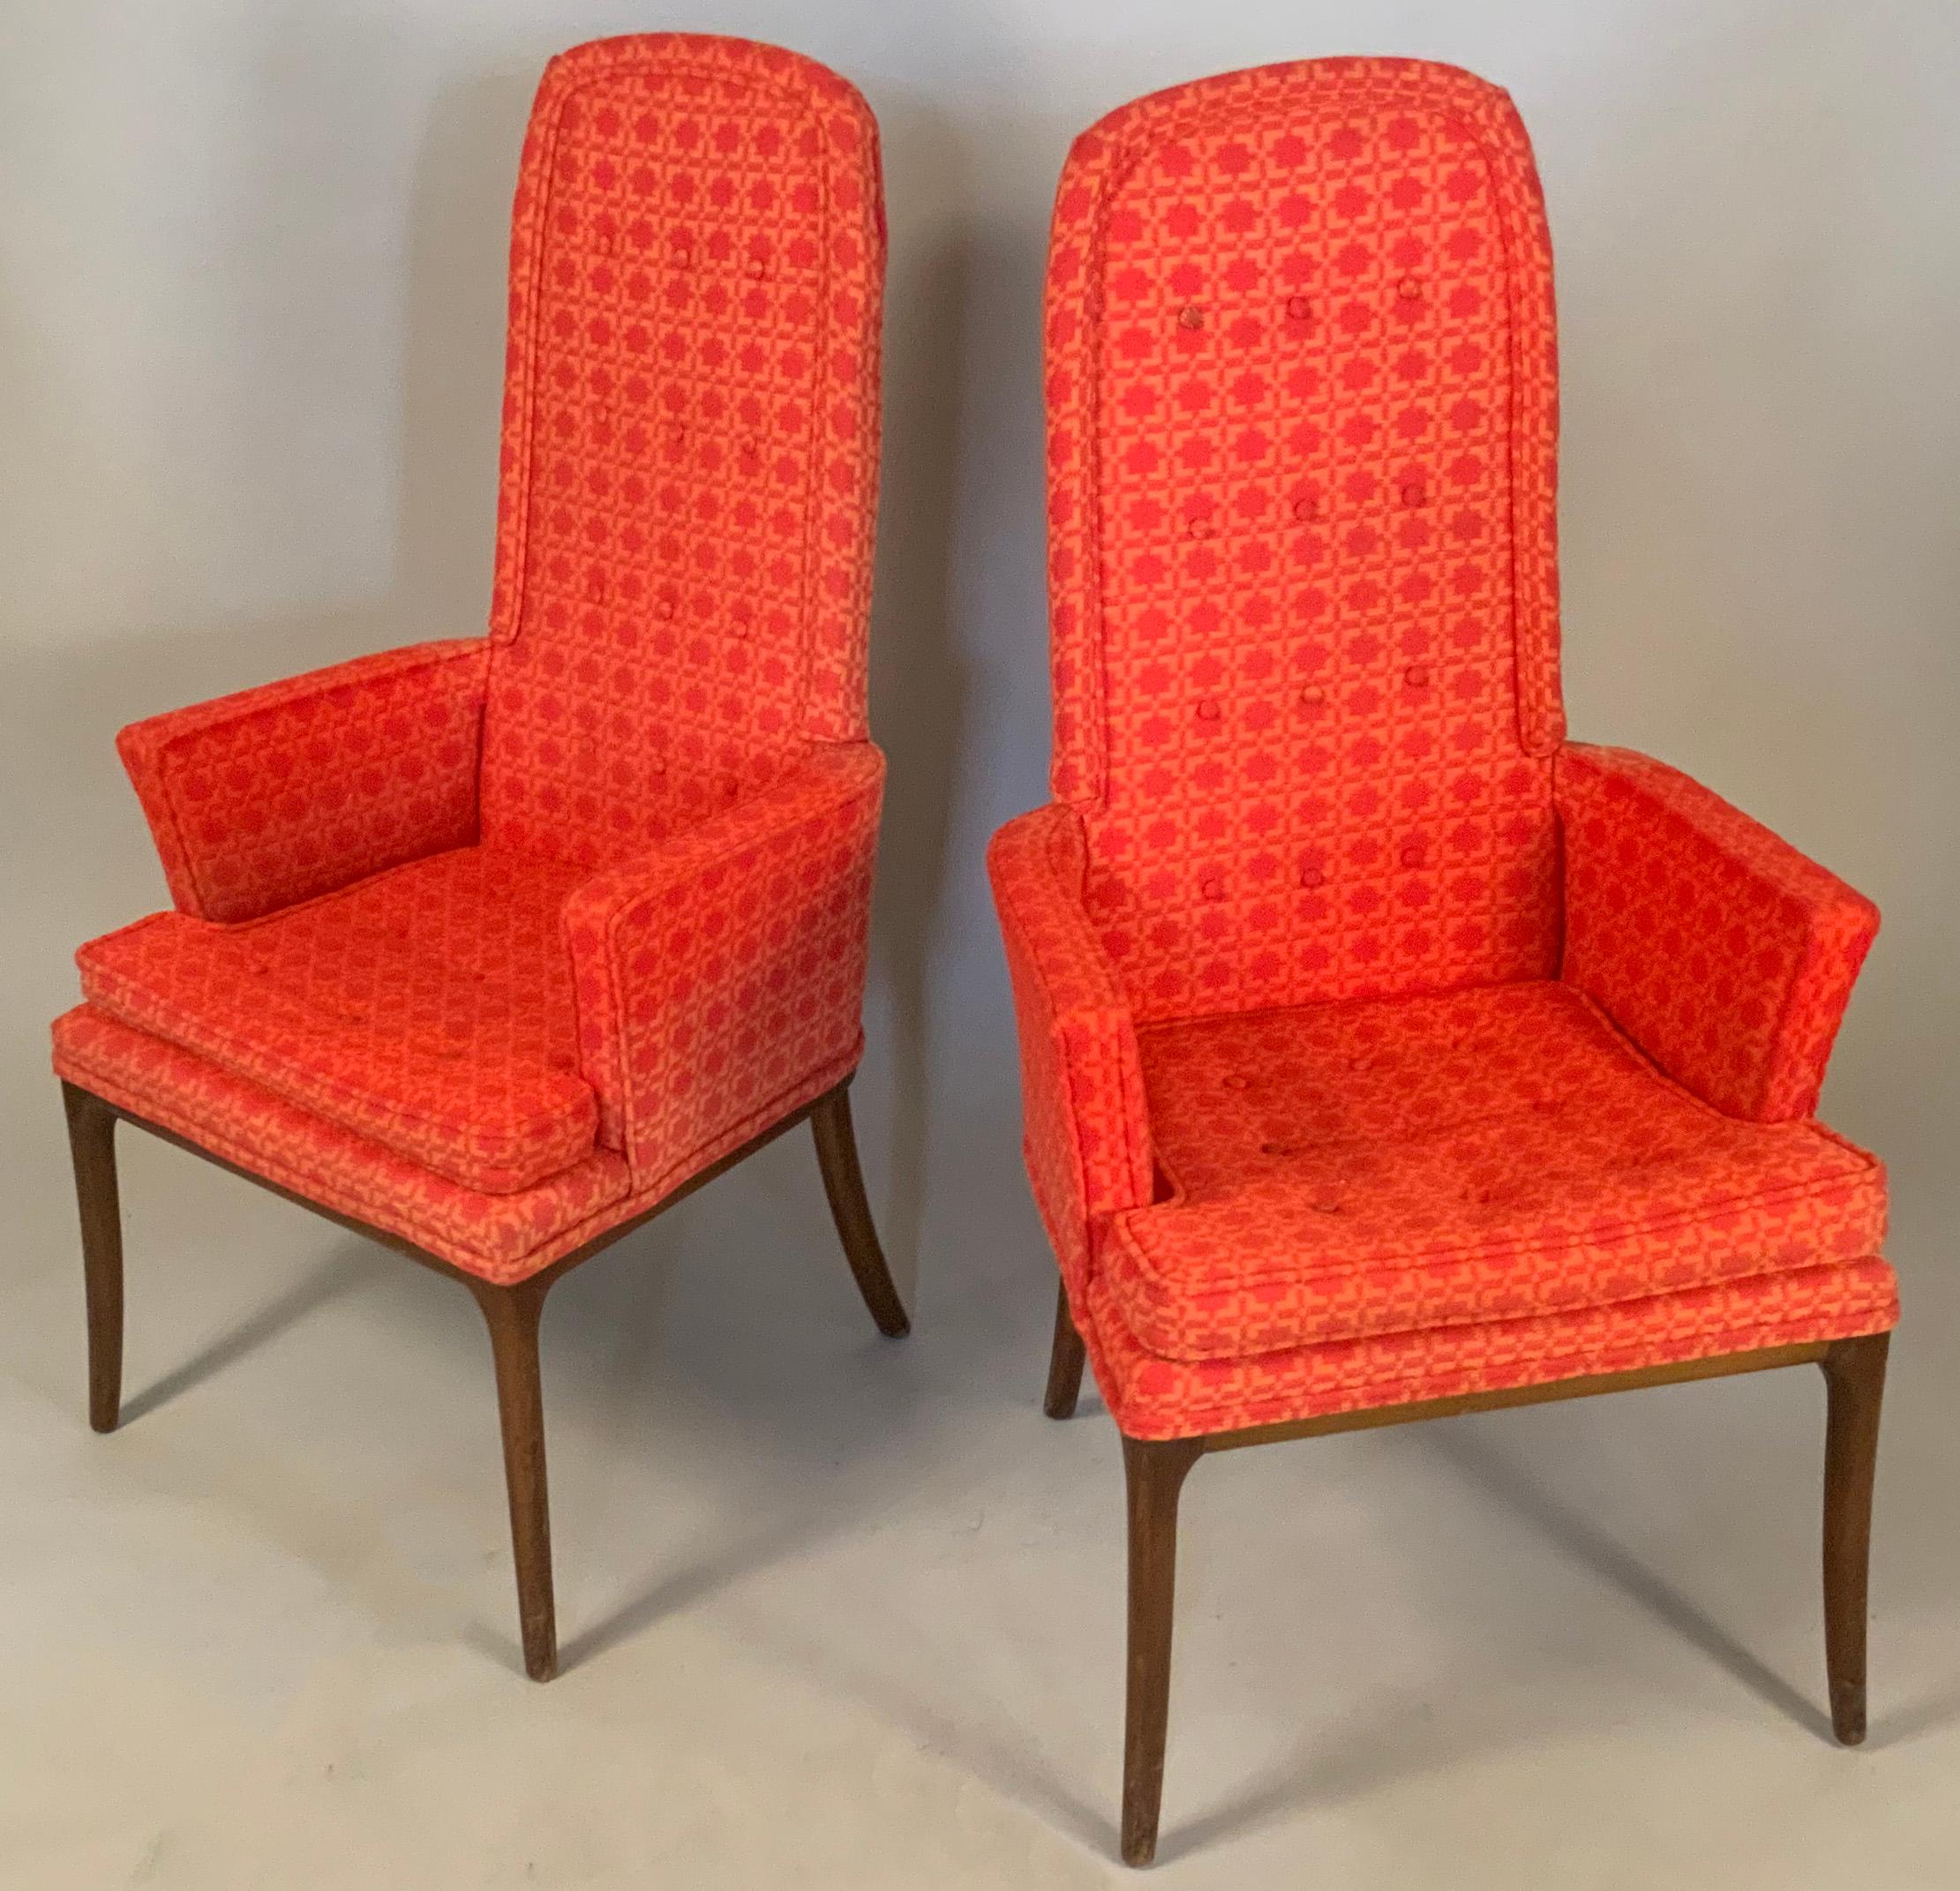 A pair of very elegant high back armchairs designed by Erwin-Lambeth. With tall slim curved top backs, and slim arms, raised on elegant slightly curved tall legs. Beautiful design and scale. In their original red patterned fabric which shows average